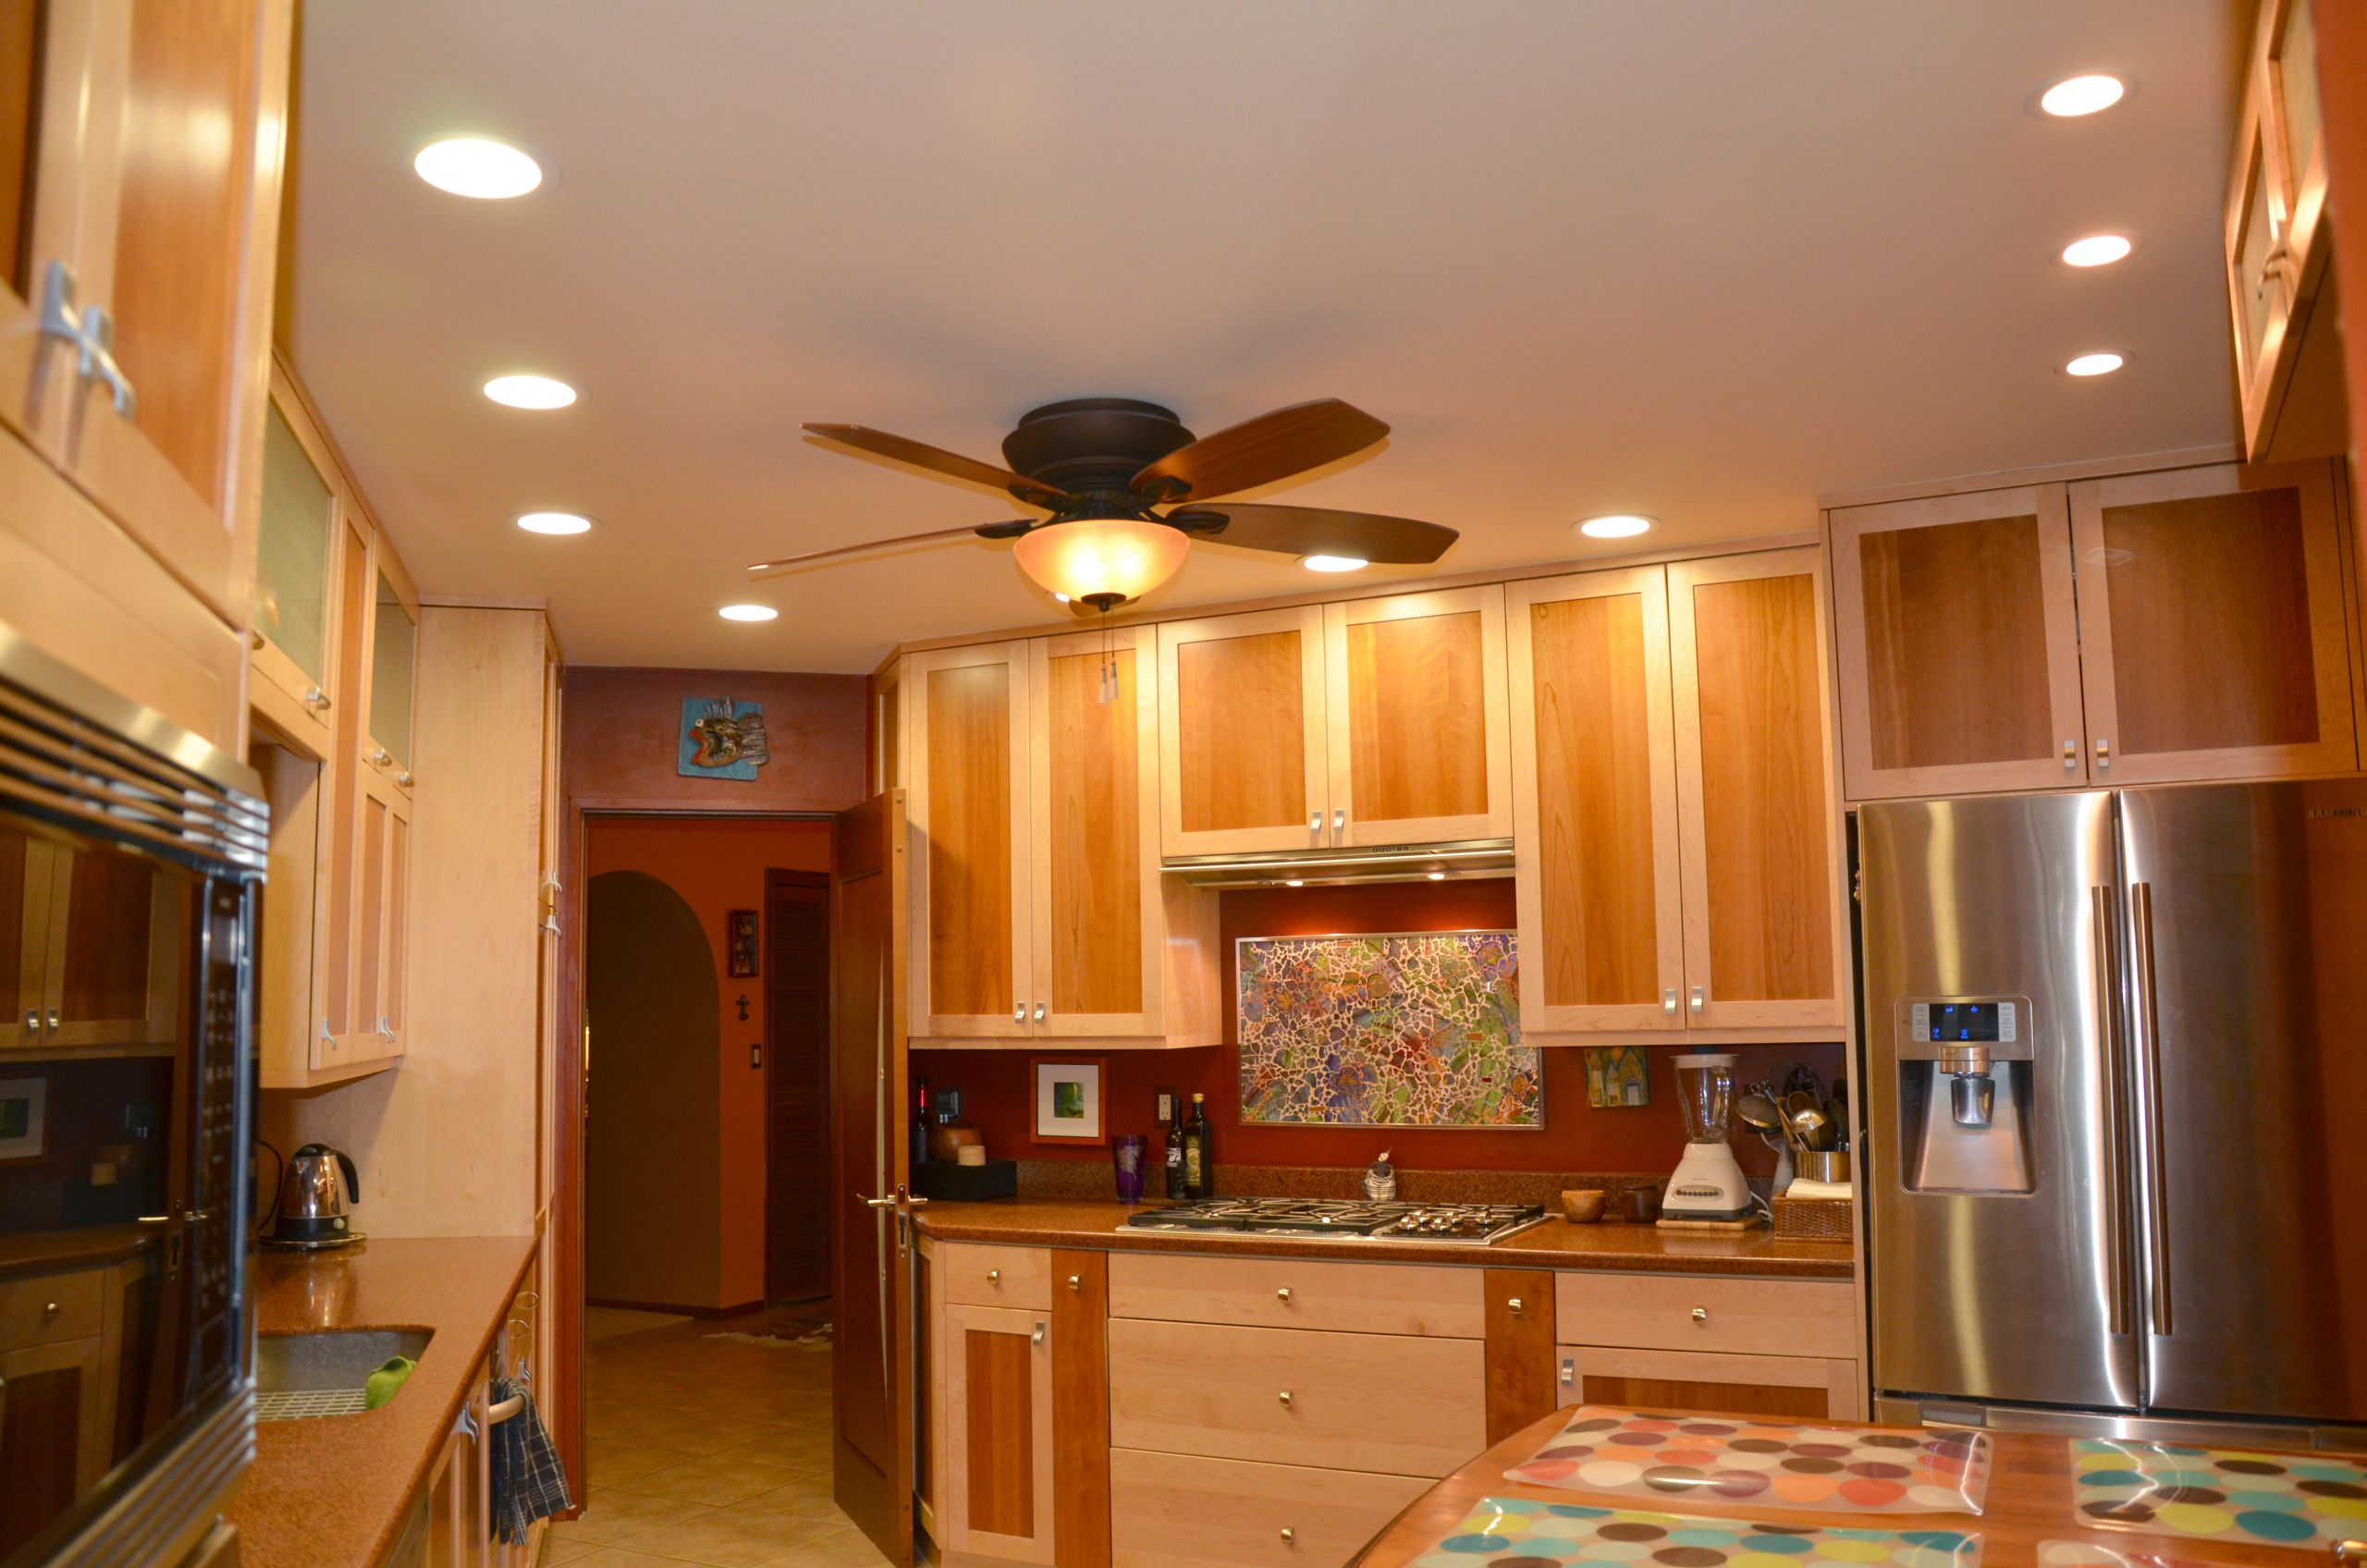 Kitchen Lights Ceiling
 How to Get Your Kitchen Ceiling Lights Right